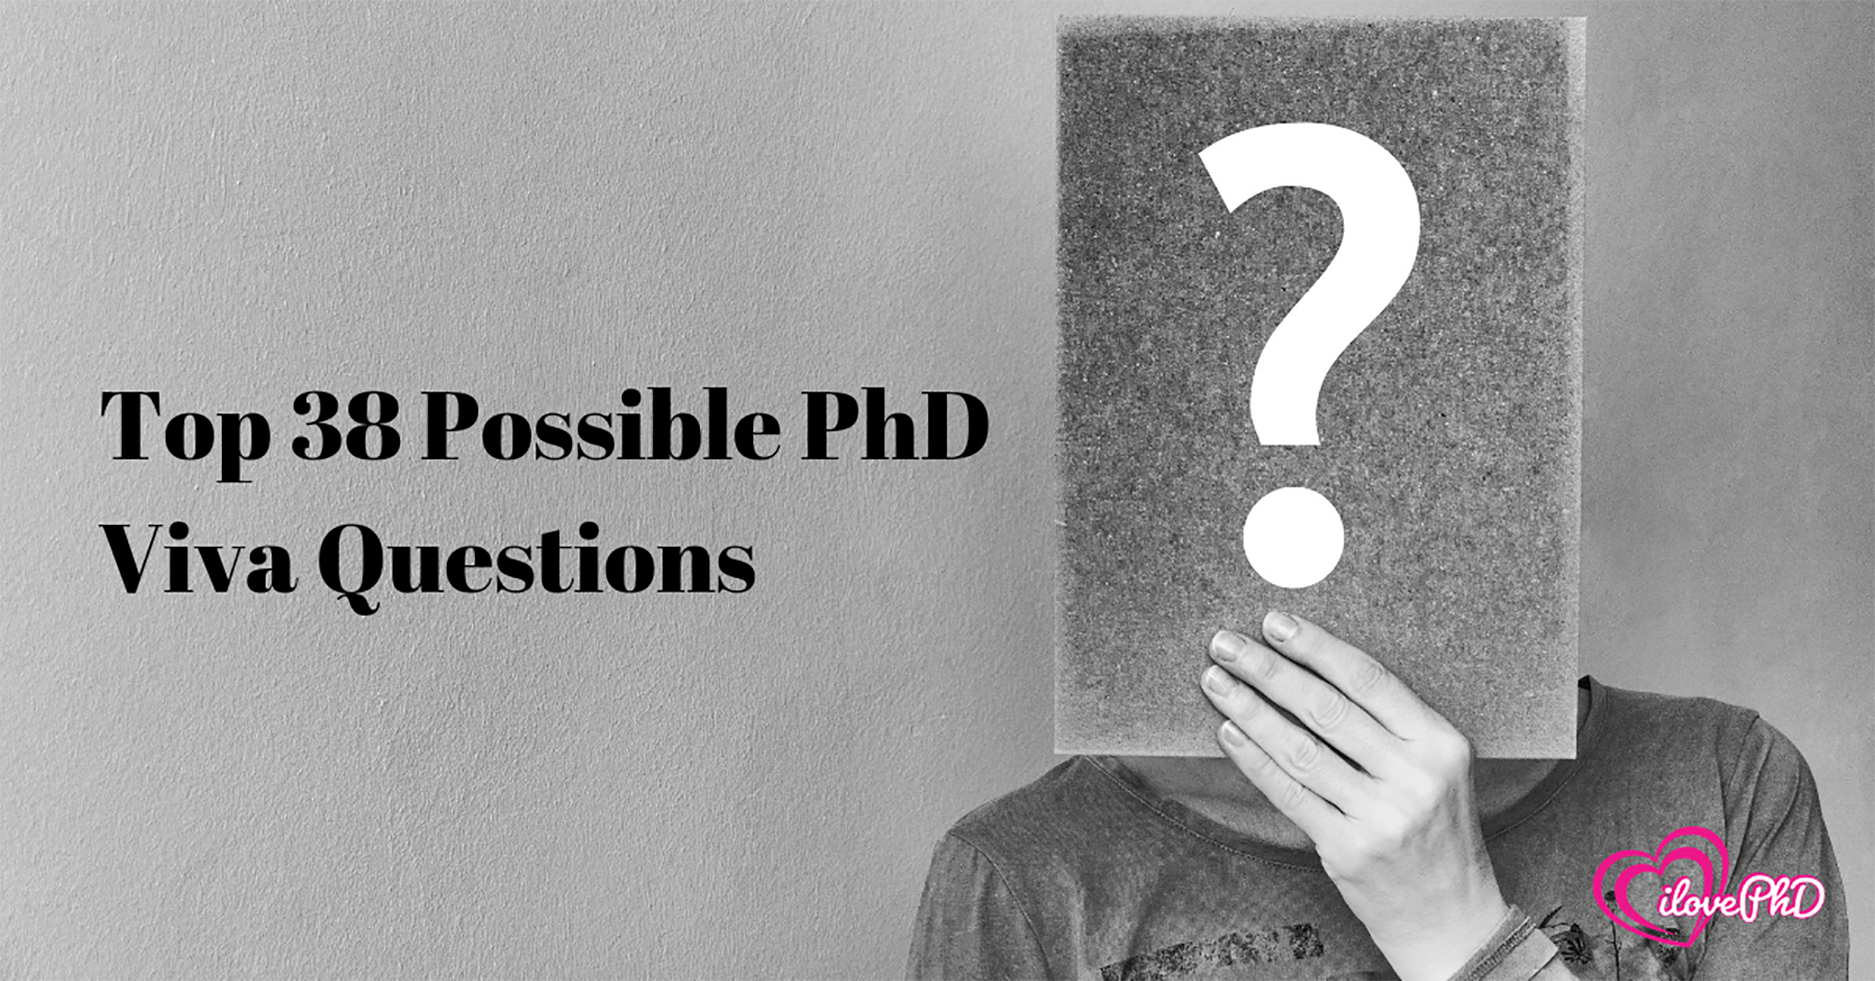 common questions asked in phd viva